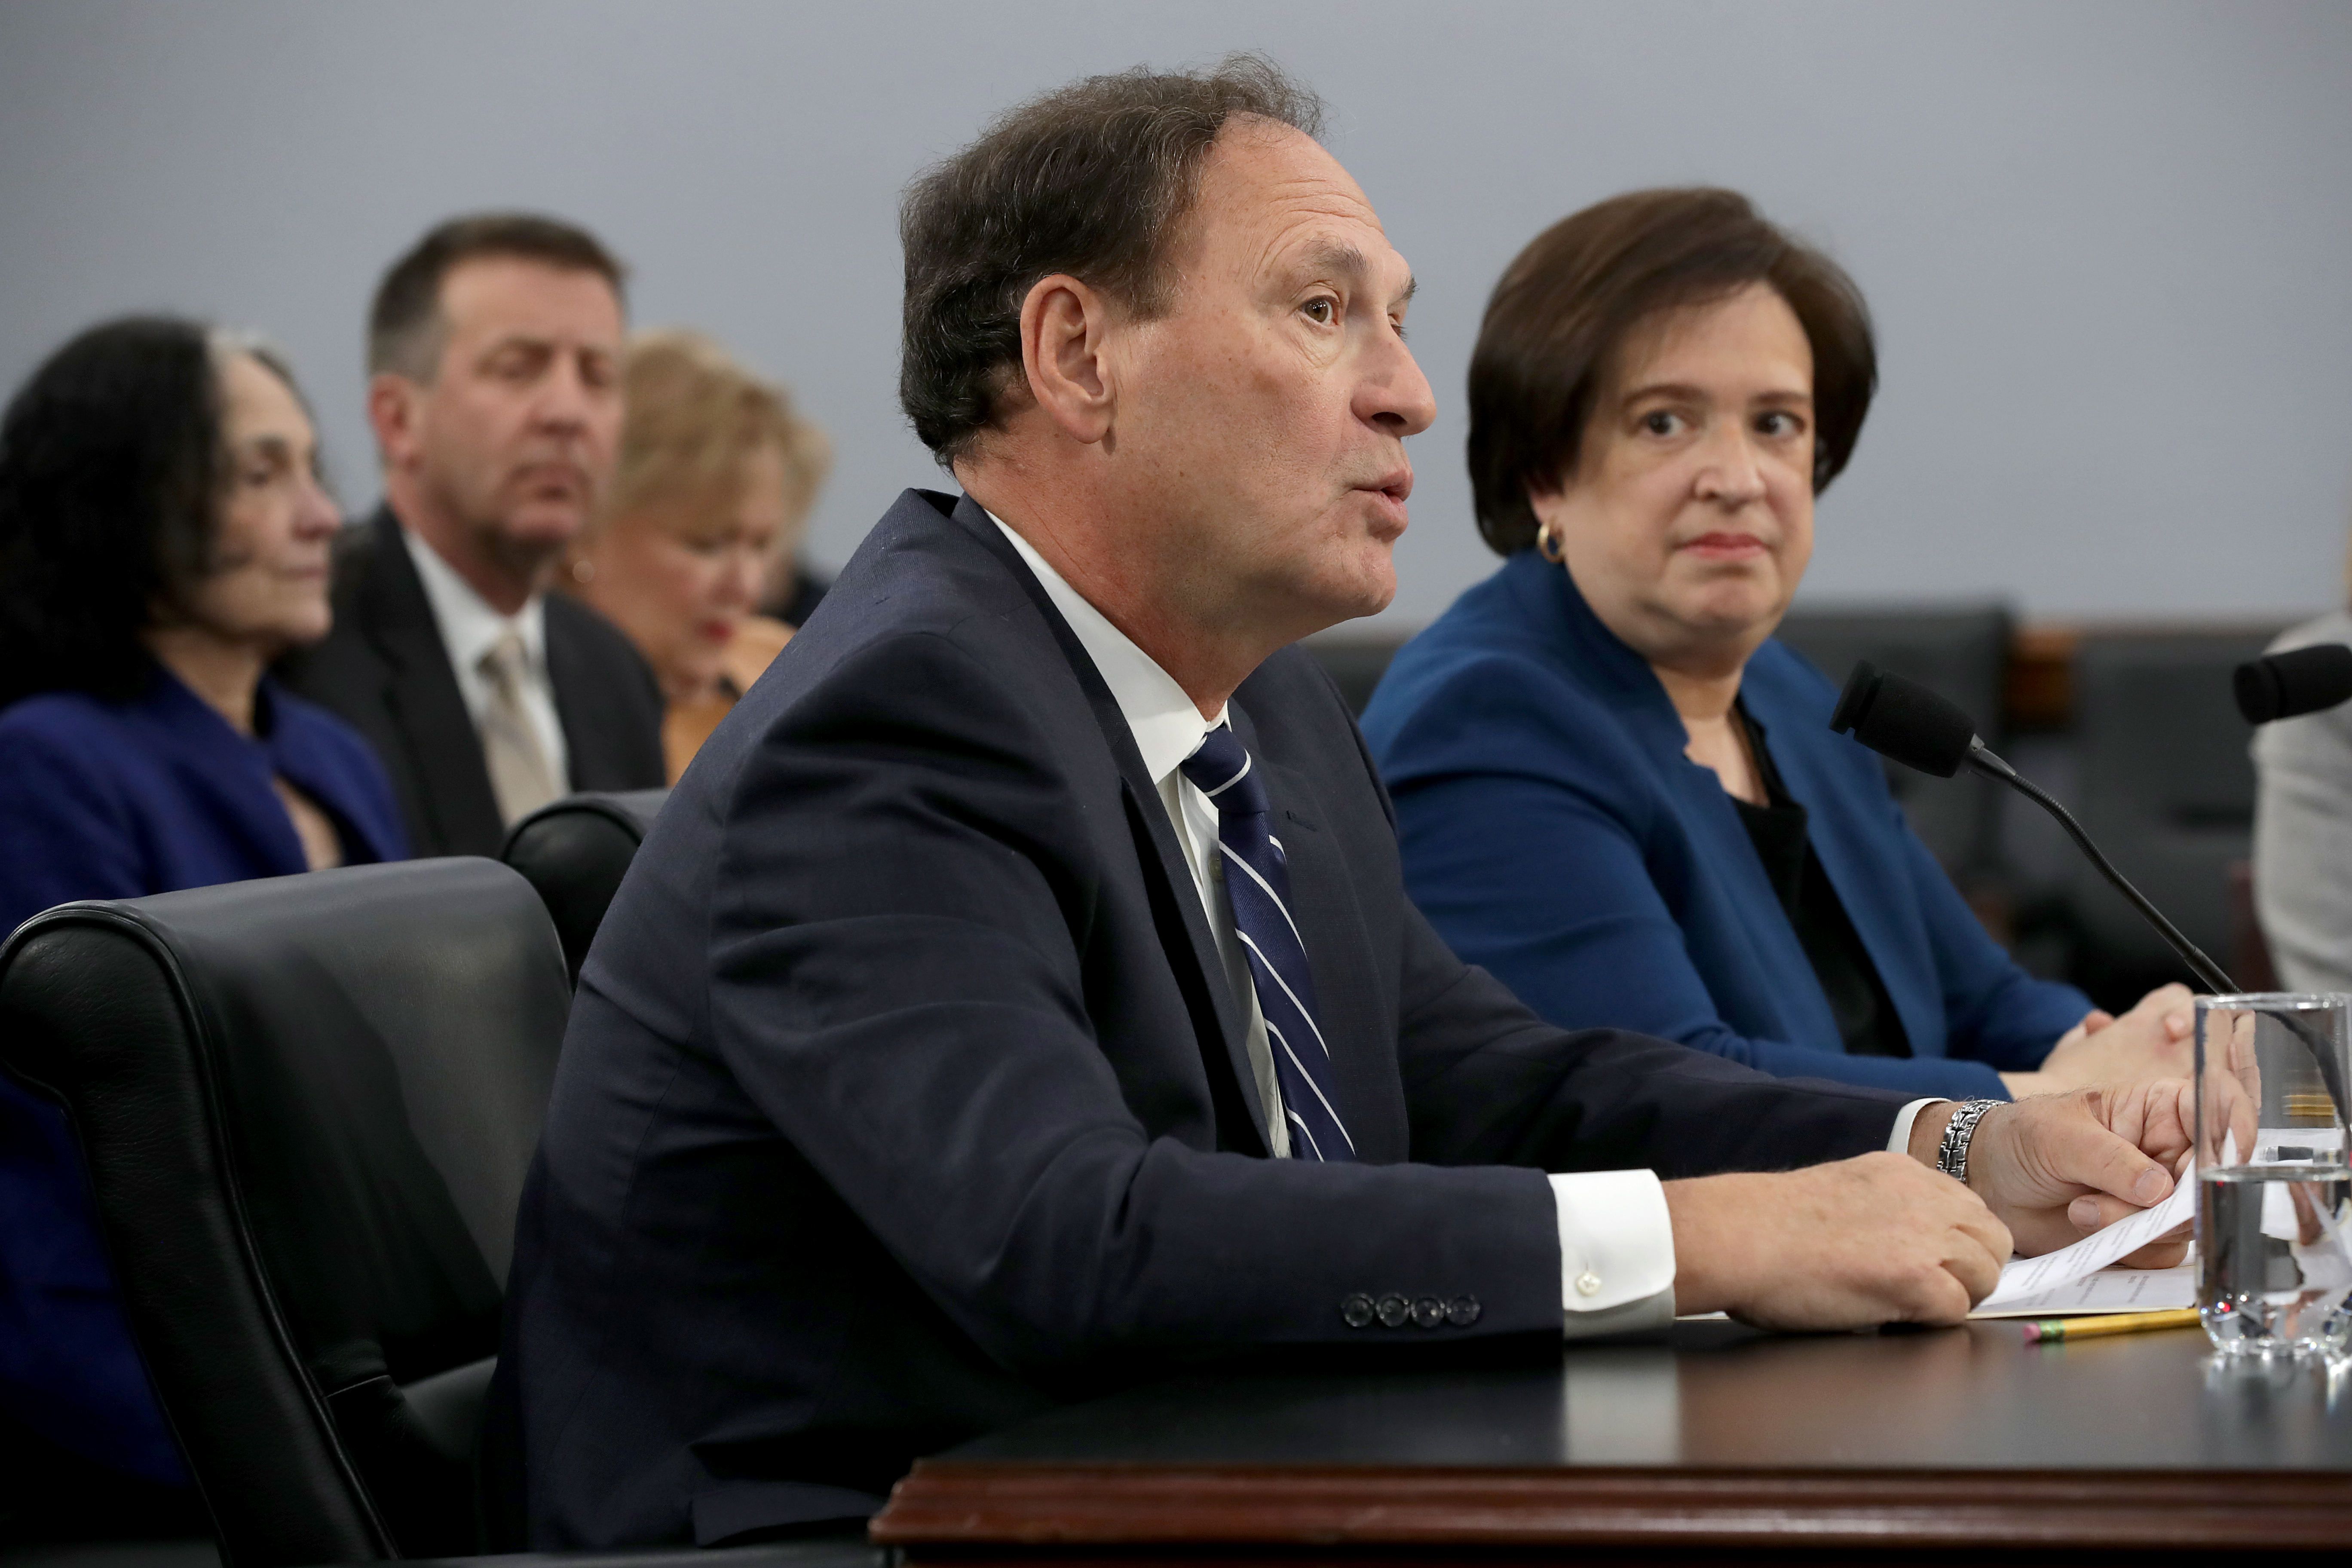 Supreme Court Justices Samuel Alito and Elana Kagan testify about the Supreme Court's budget during a hearing of the House Appropriations Committee's Financial Services and General Government Subcommittee on March 07, 2019 in Washington, D.C. (Chip Somodevilla/Getty Images)